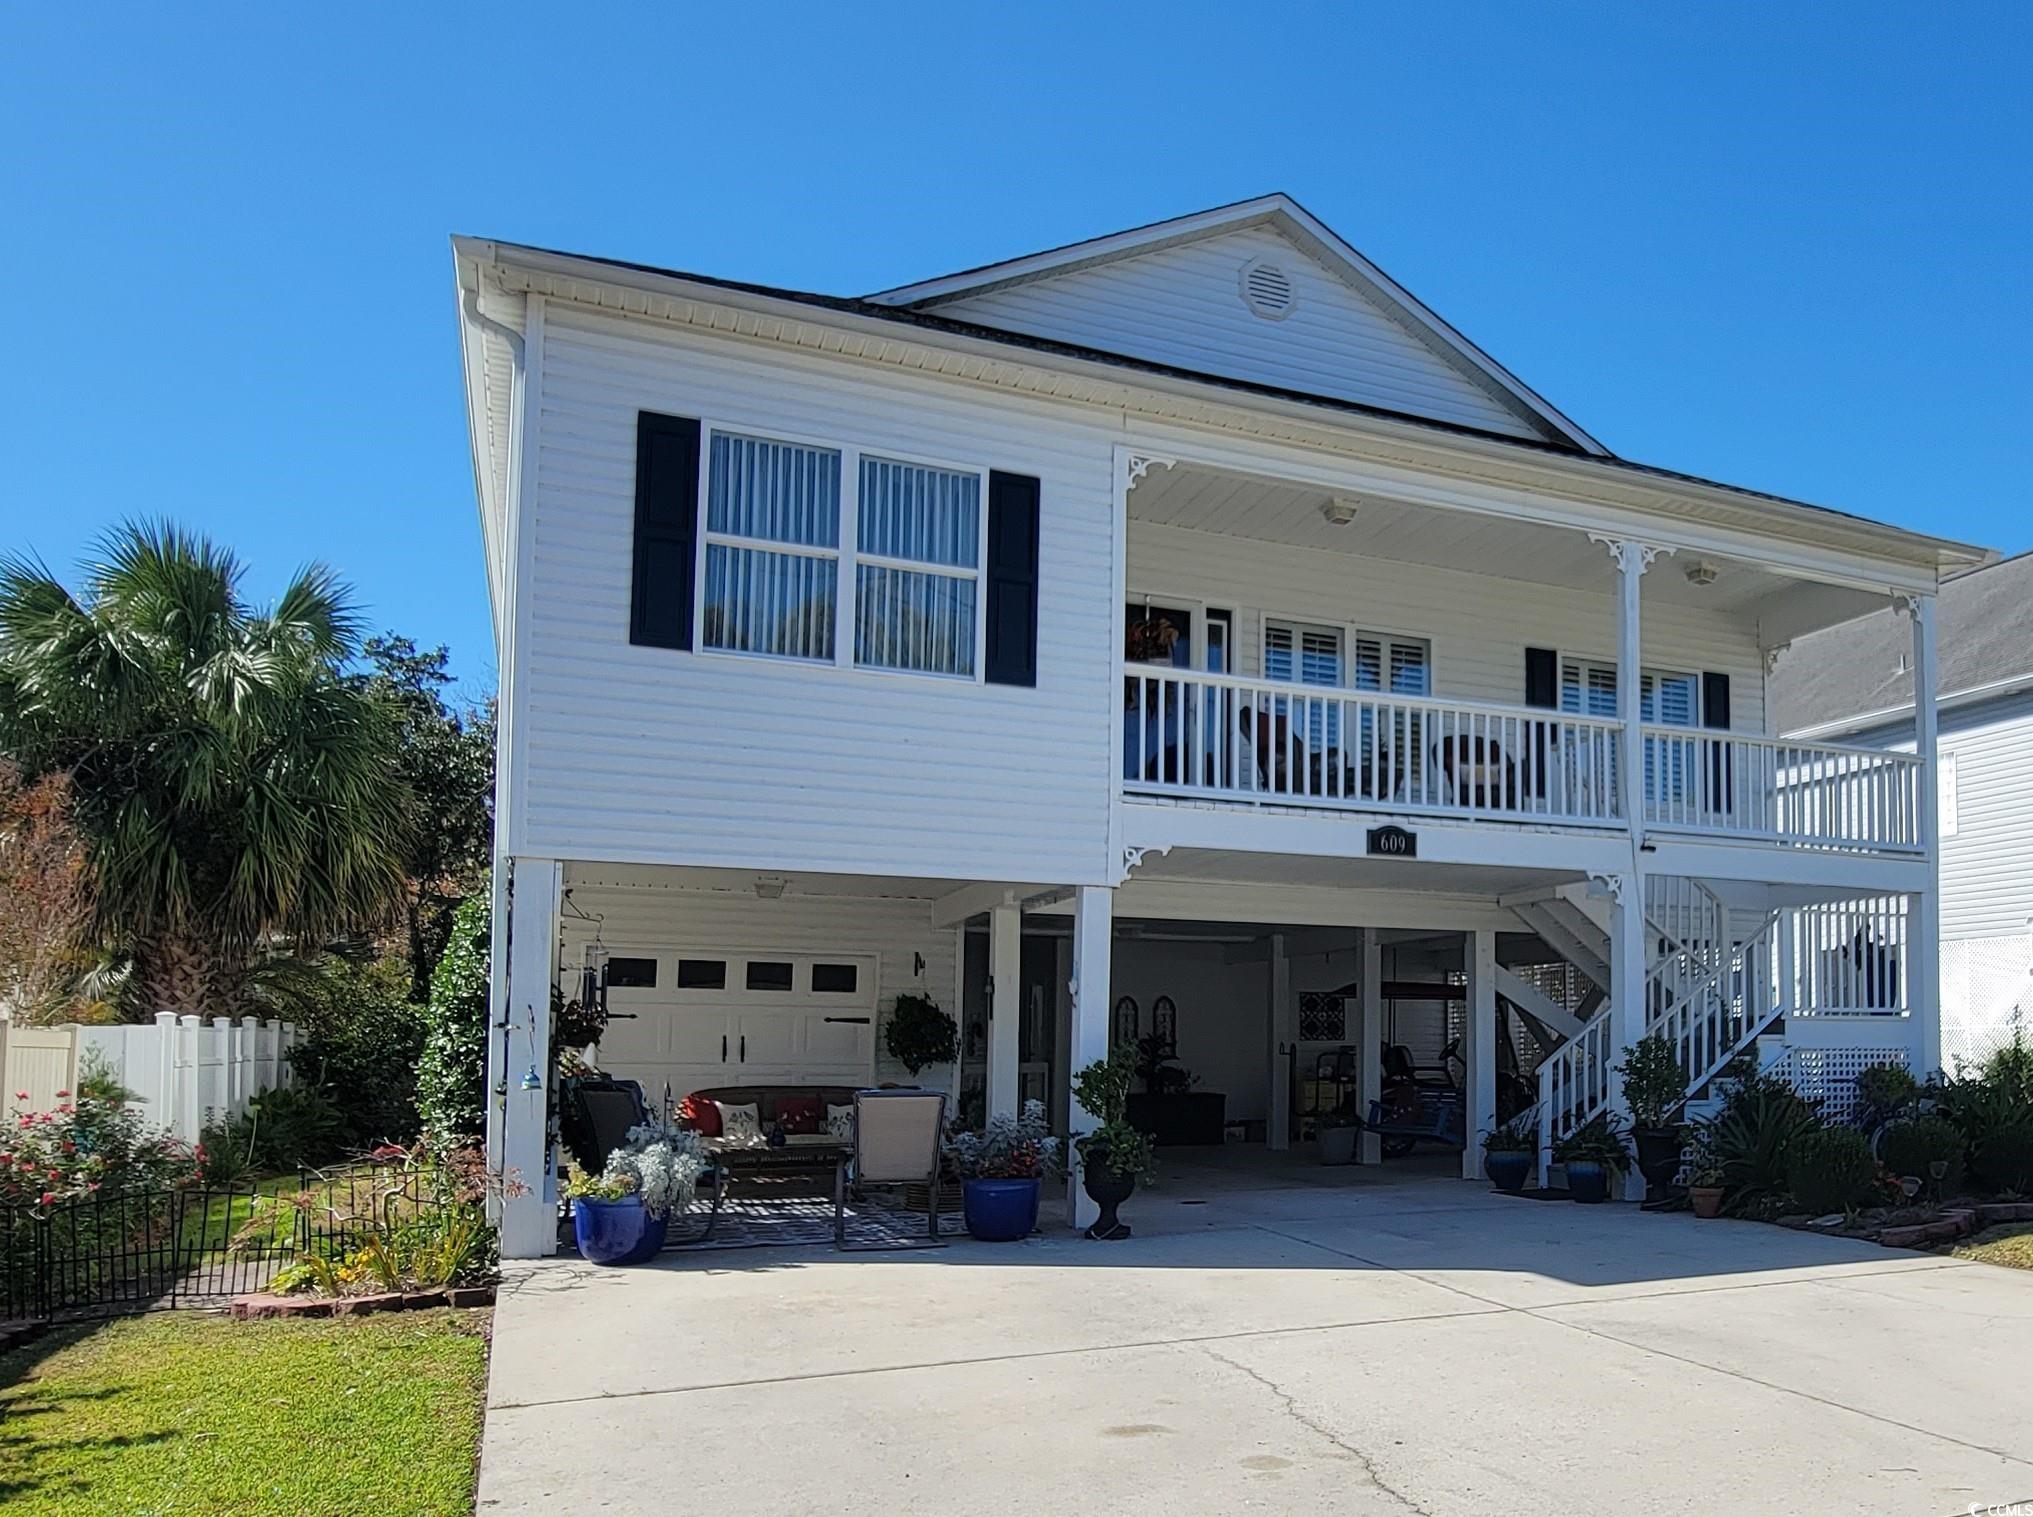 price improvement! no hoa fees and no flood zone - welcome to the highly desired area of cresent beach! this absolutely gorgeous 3-bedroom (only one wall would have to be put back for the 4th bedroom), 4-full bathroom home in crescent beach that is only a 5-minute walk to the ocean. this raised beach style home is on a closed end street that has less traffic flow which includes an enclosed 1 car garage with extra storage closet attached in the garage area. (the first floor ensuite bedroom could be a mother in-law suite) the blooming landscaped yard sits on a pond with tranquil sounds of fountains flowing. the backyard and both sides of the home are fenced in for pets and offers an outdoor shower. upstairs, you will find the main living areas that offer an open floor plan with beautiful wood flooring throughout. the open living area with a gas fireplace connects to the kitchen and formal dining. the fully equipped kitchen offers lots of cabinet & counter space. the master bedroom has double doors to the back deck, and easy access to the enclosed external elevator. the master bath has a glassed walk-in shower and garden tub with natural lighting of a window over the tub as well as double sink vanities. each bedroom features a ceiling fan, plenty of closet space, and easy access to a bathroom. the outside space offers a large back deck for relaxing and entertaining. recent upgrades include new shingles in 2023, a new hvac system in 2021 and the irrigation system pulls from the pond. this property is conveniently located to all that north myrtle beach has to offer- whether you want to shop, dine out, visit attractions, golf (47 courses within 10 miles), go bowling or visit the beach - this is the place for you! hurry and schedule your showing today appreciate the characteristics of what this home has to offer.